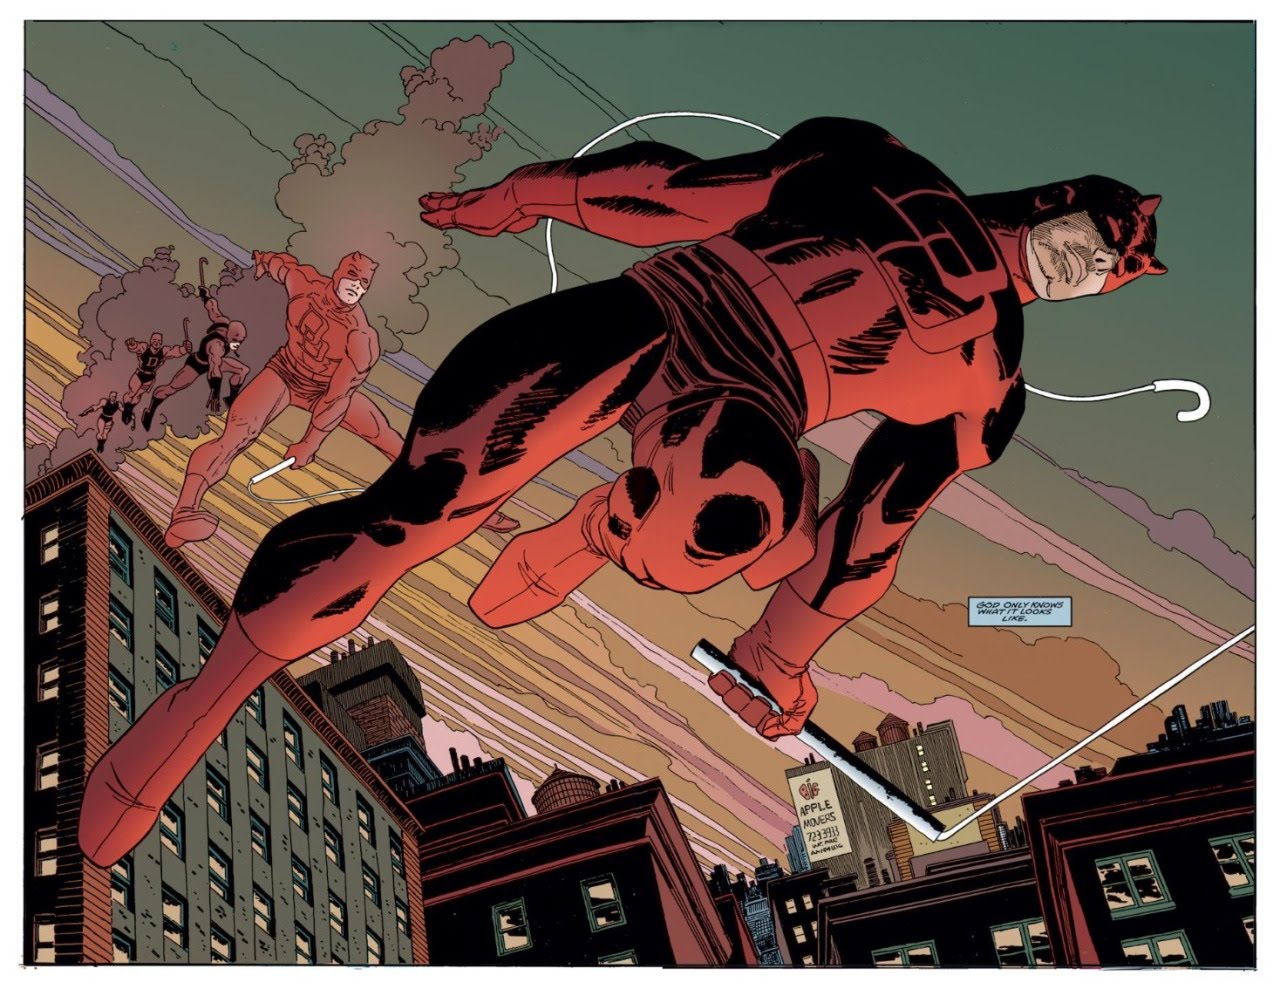 Daredevil The Man Without Fear Review By Frank Miller Analysis By Deffinition as Part of Graphic Novel Talk